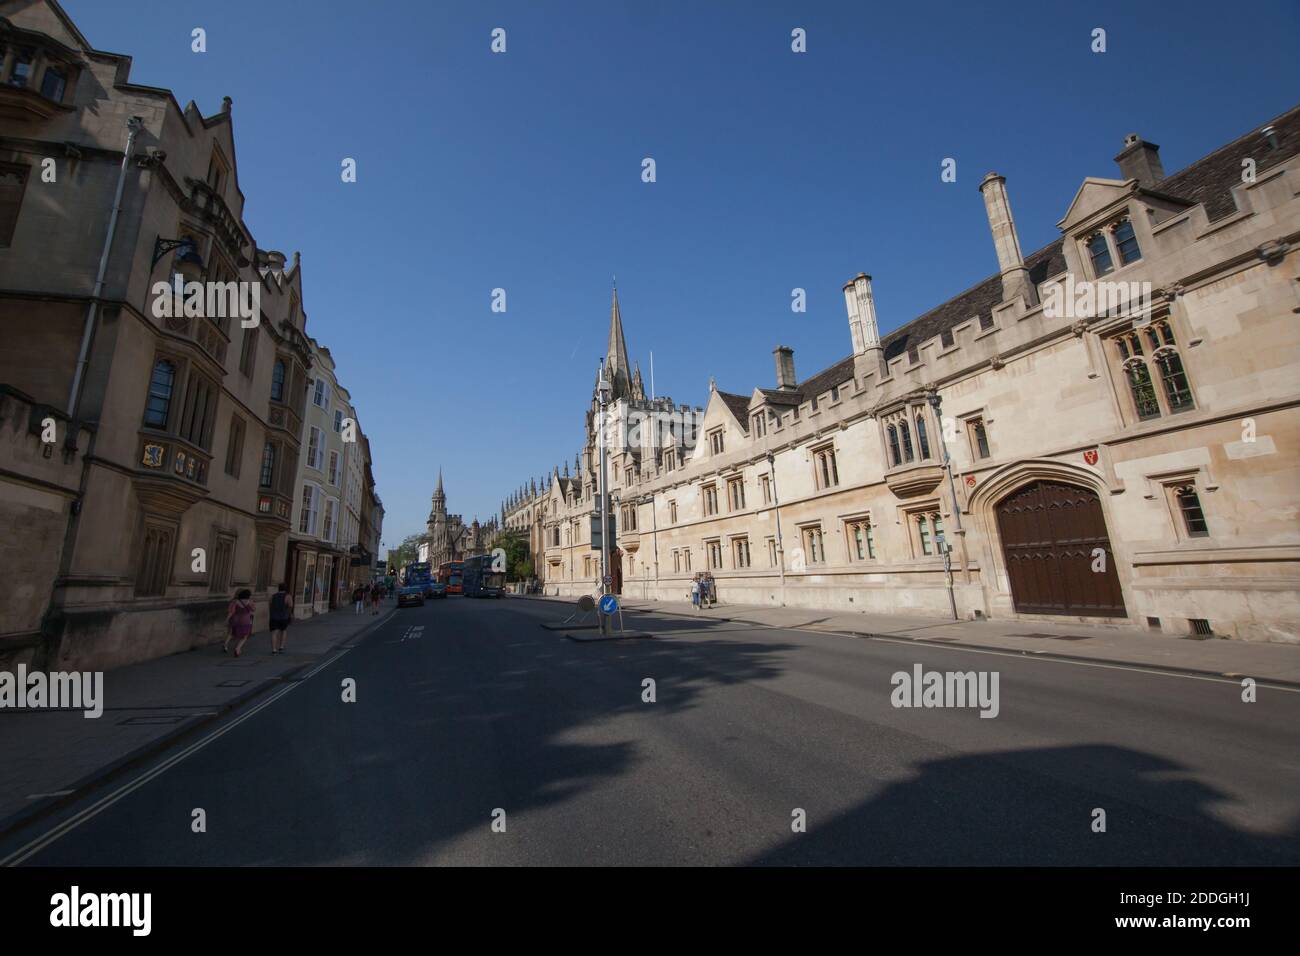 Views of All Souls College, part of The University of Oxford in the UK, taken on the 15th of September 2020 Stock Photo